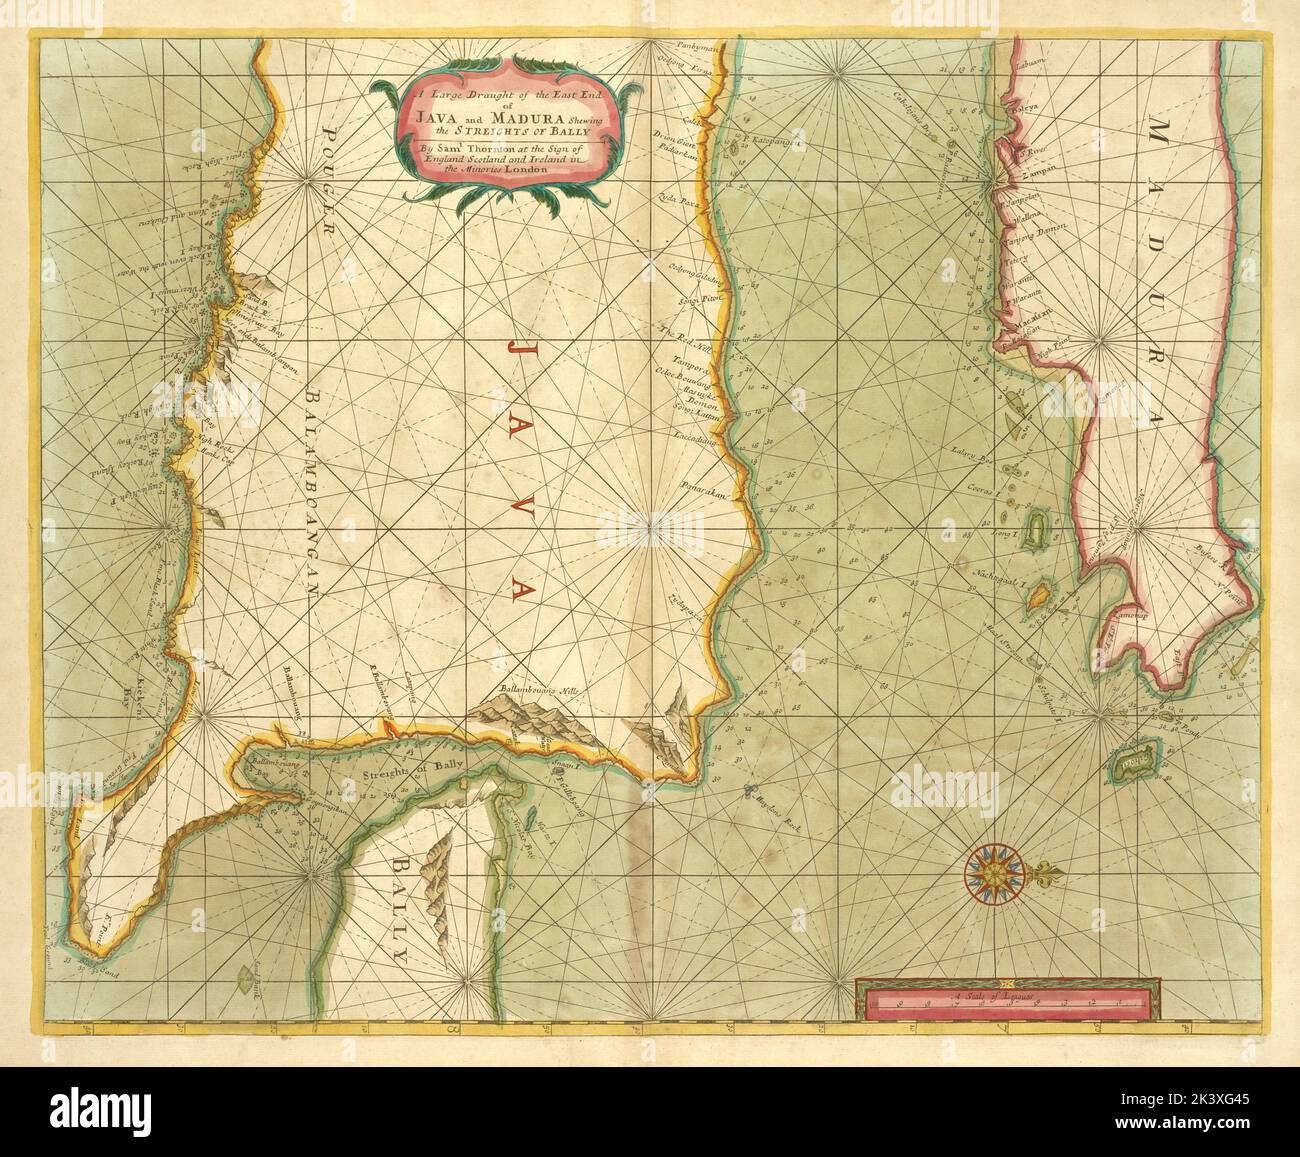 A large draught of the east end of JAVA and MADURA shewing the streights of BALLY 1702 - 1707. Cartographic. Maps, Nautical charts. Lionel Pincus and Princess Firyal Map Division. Indonesia Stock Photo